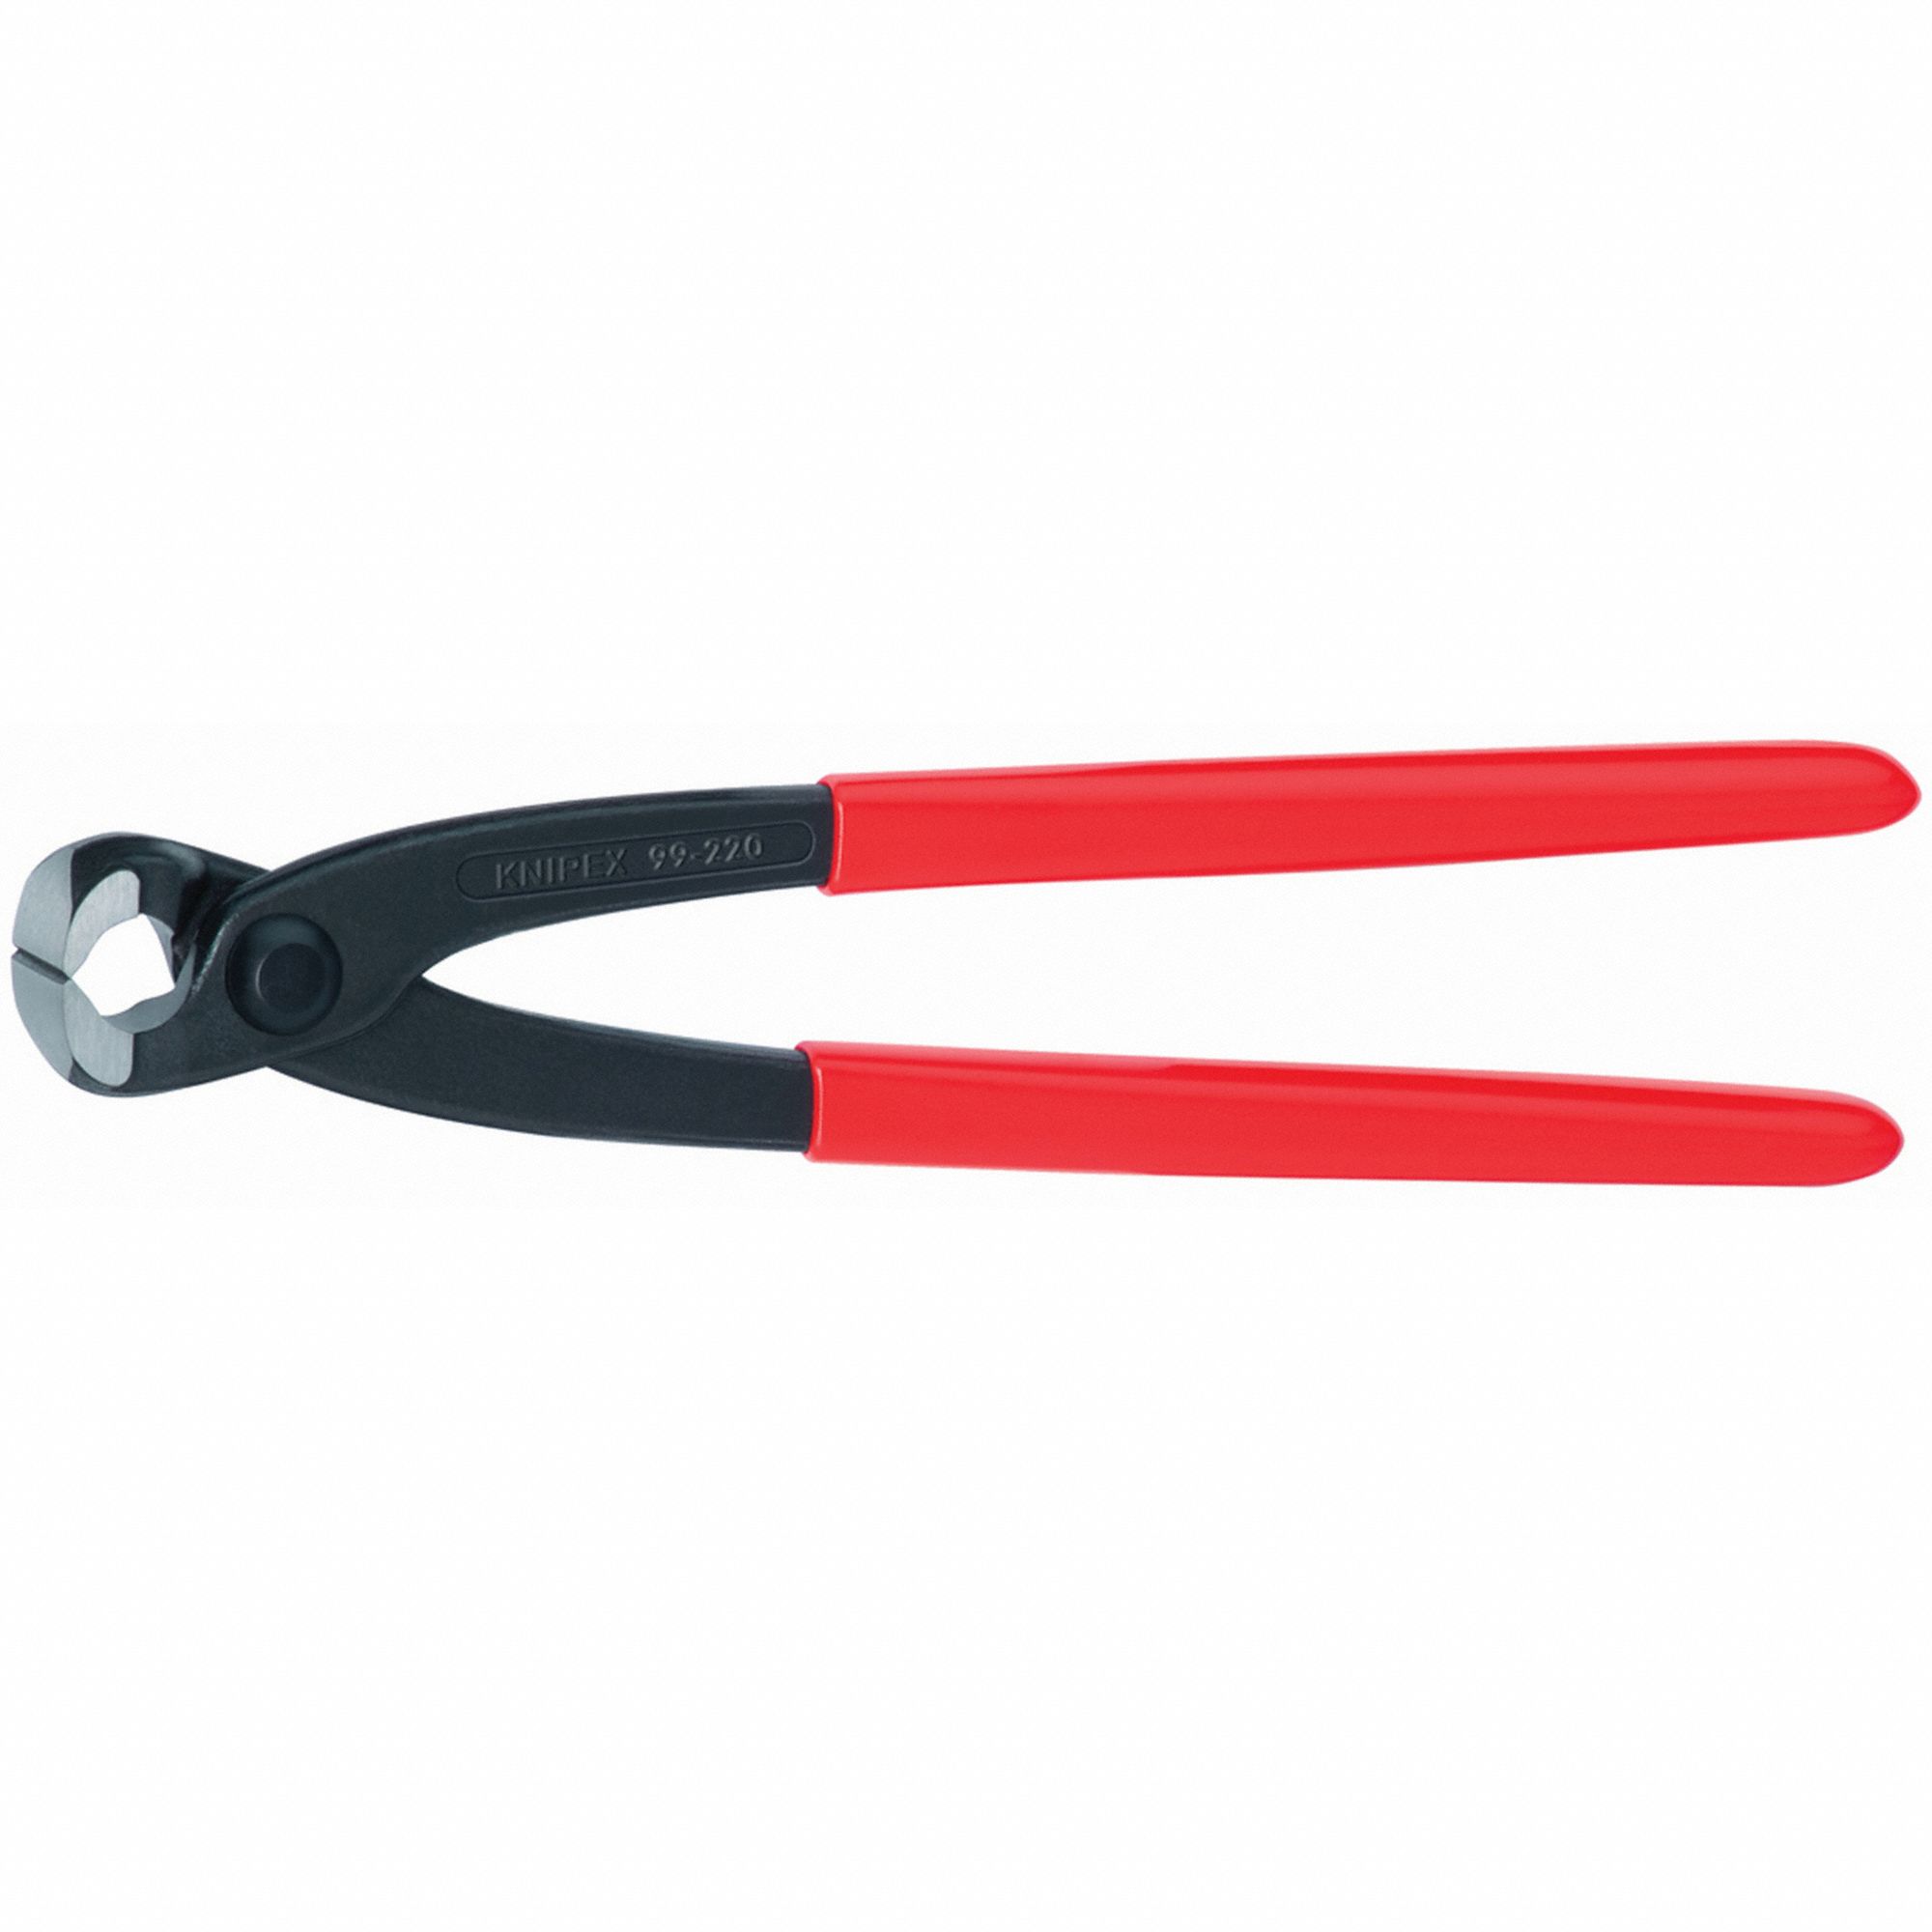 End Cutting Nippers: 11 3/4 in Overall Lg, For 0.13 in Max Wire Thick, Steel, Plastic